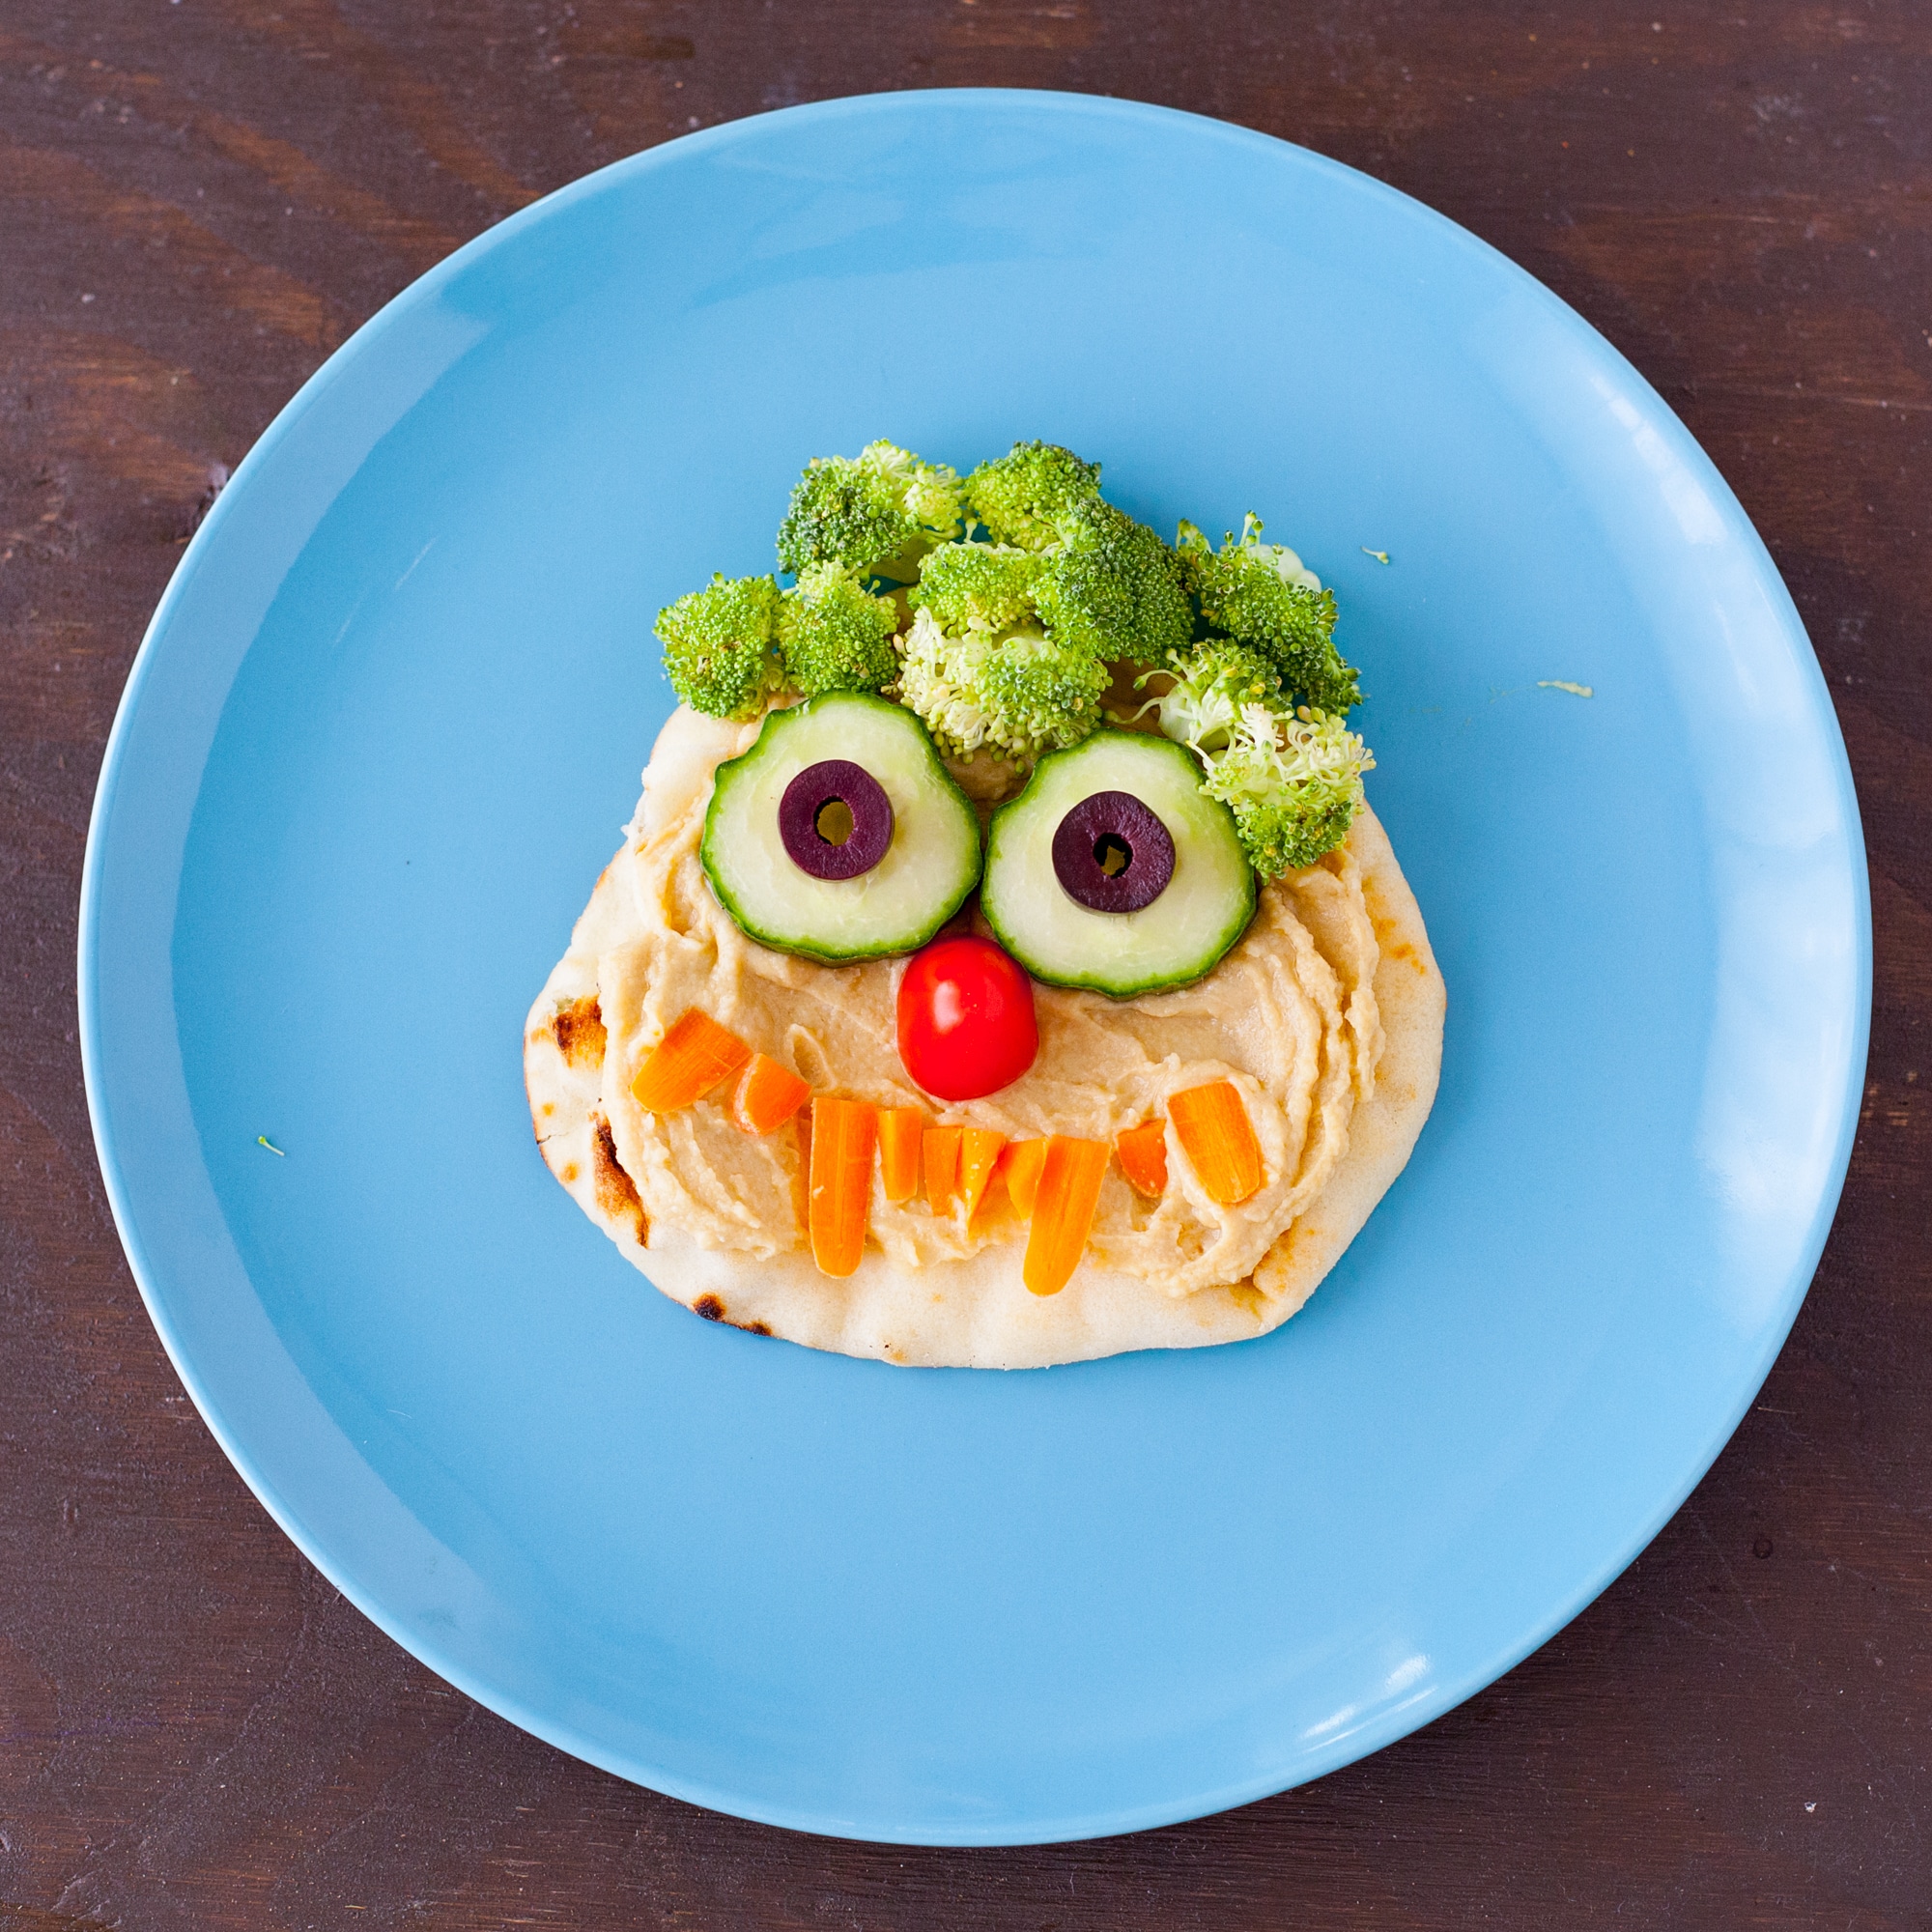 This friendly hummus monster is adorable any time of year, but makes the perfect healthy Halloween lunch for kids. And it's so easy to make! From EatingRIchly.com